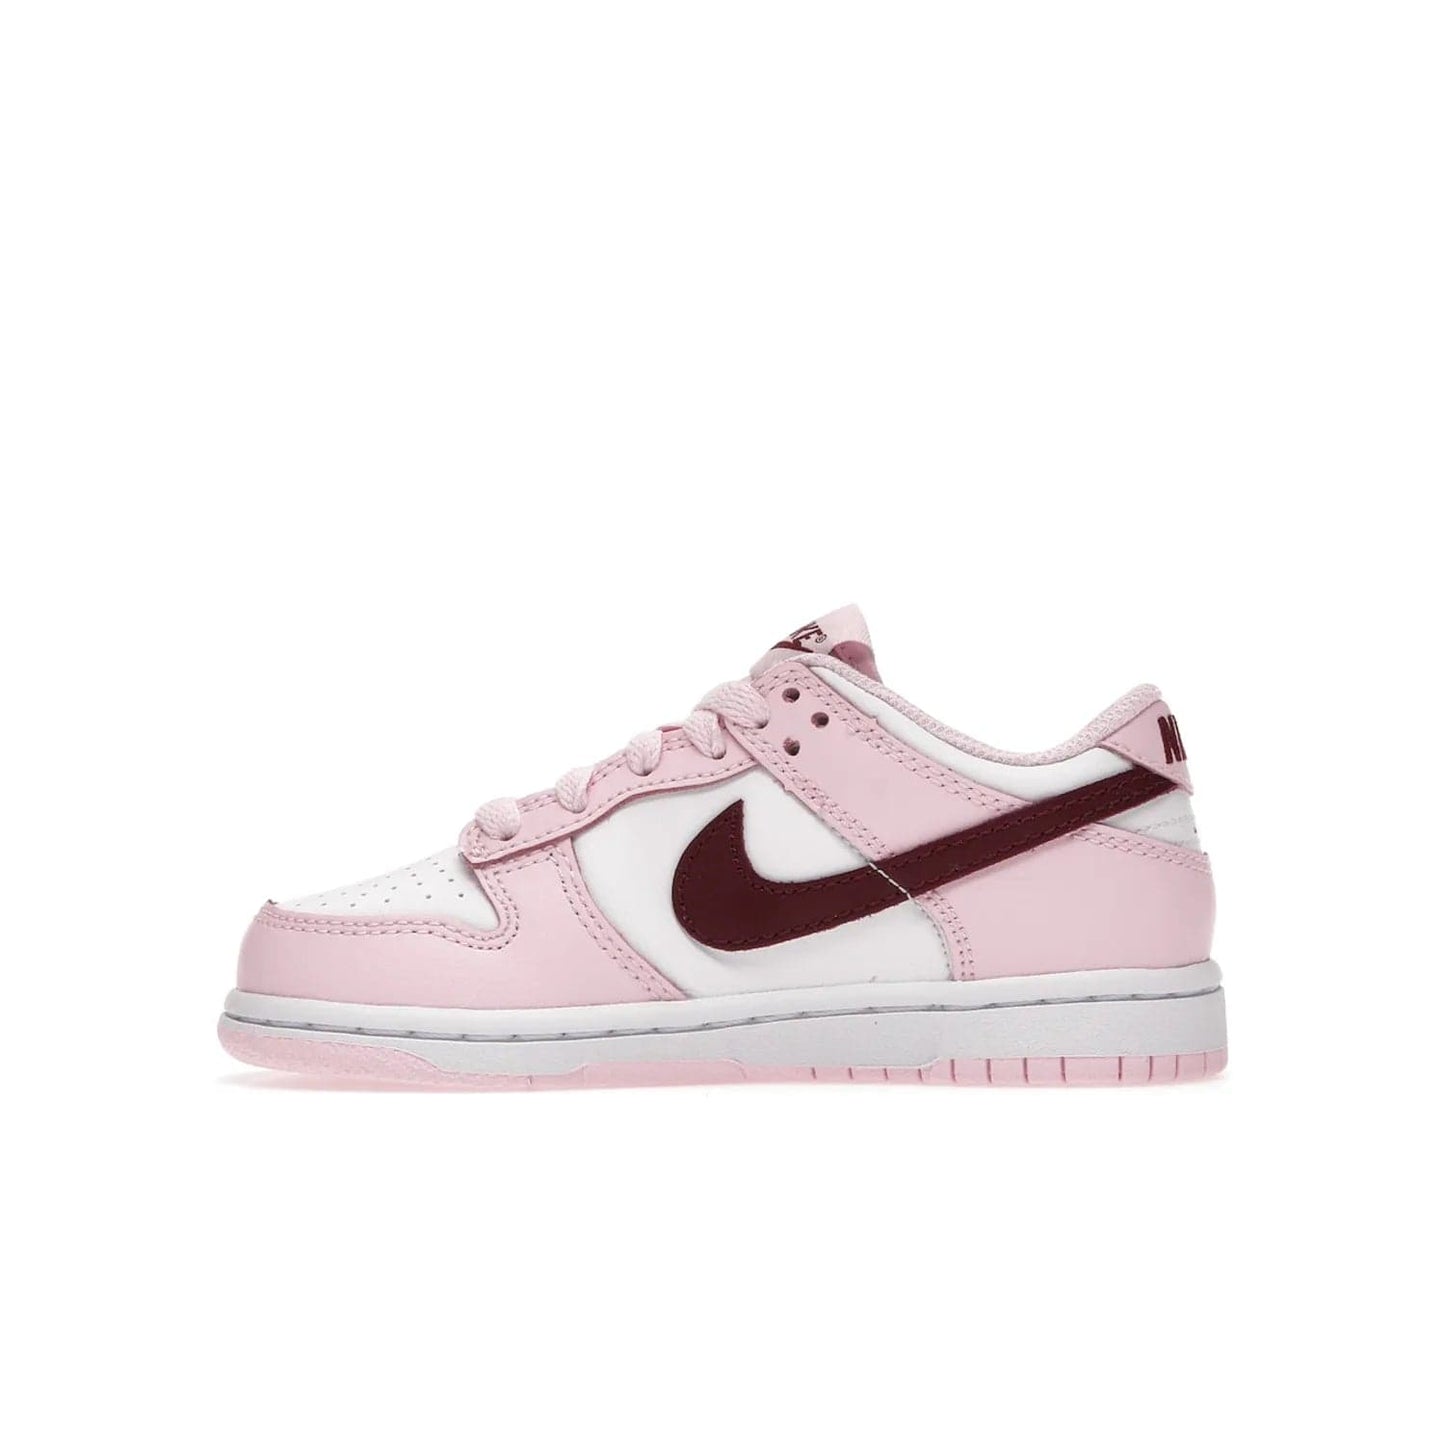 Nike Dunk Low Pink Red White (PS) - Image 19 - Only at www.BallersClubKickz.com - Introducing the Nike Dunk Low Pink Red White (PS), the perfect addition to your sneaker collection. A classic silhouette with modern vibrant colors, including a pink upper with red and white accents and a white midsole. Comfort and durability, perfect for any outfit. Limited edition, available June 22nd.